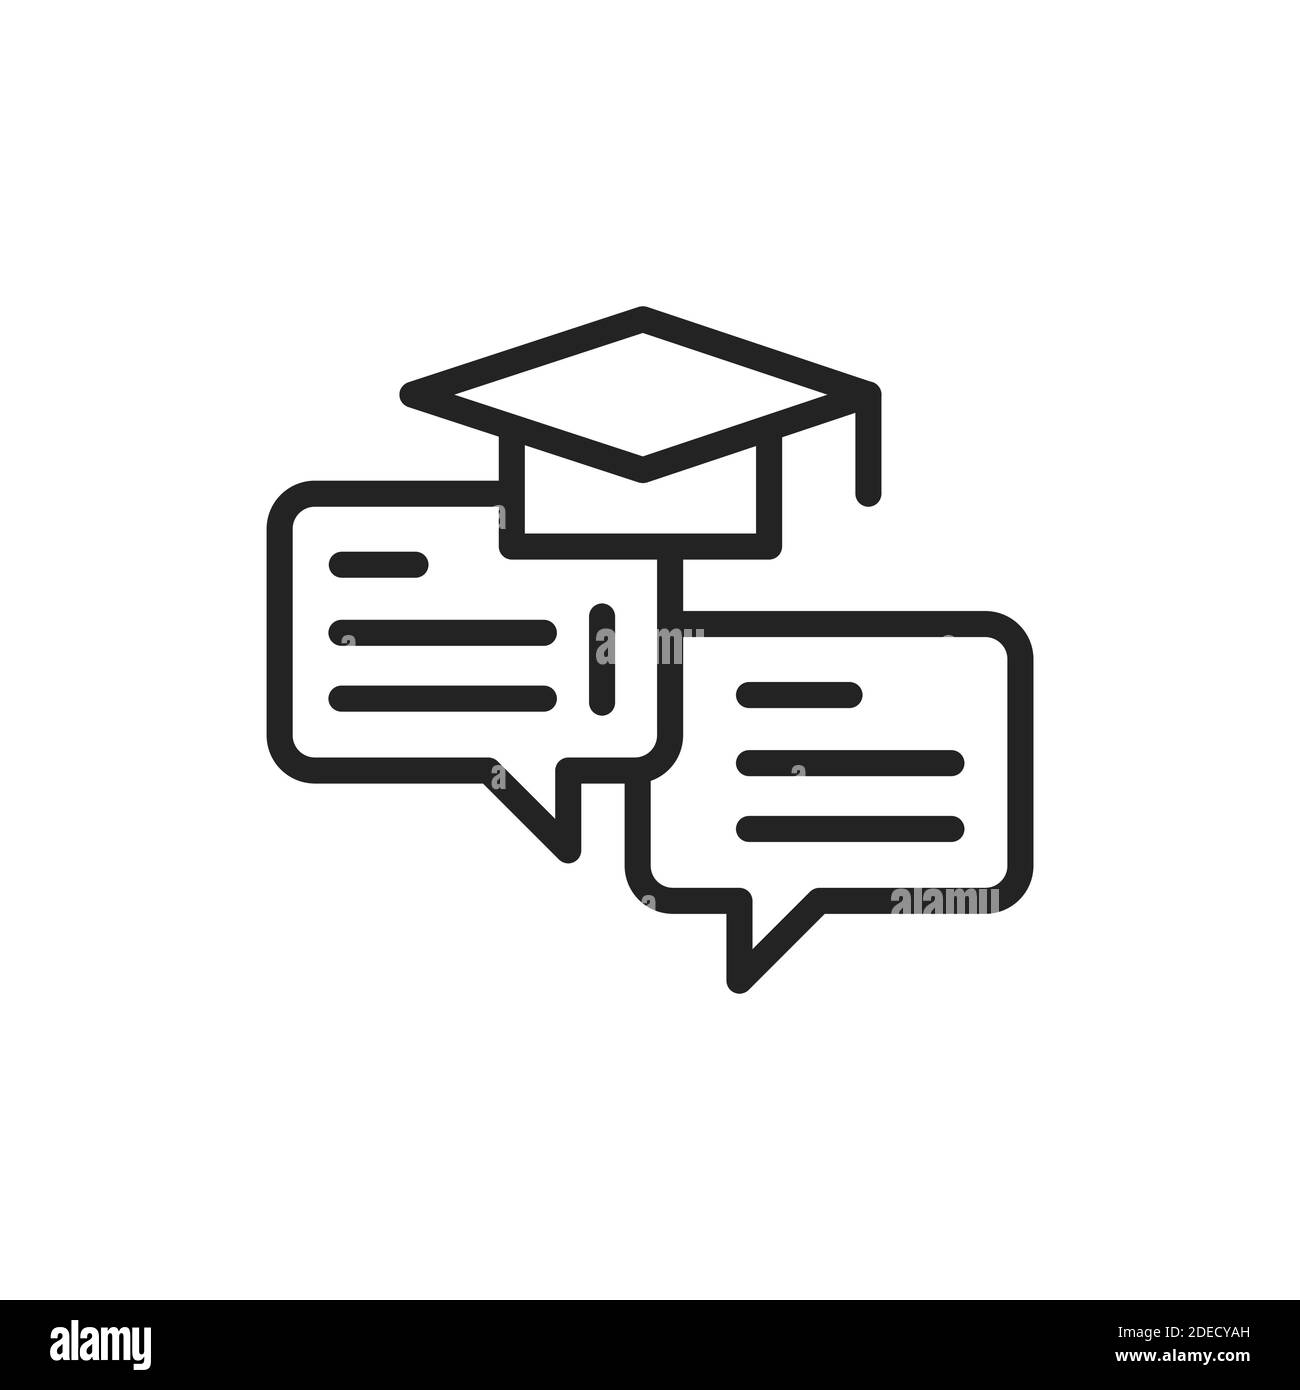 Oratory courses black line icon. Outline pictogram for web page, mobile app, promo. Stock Vector